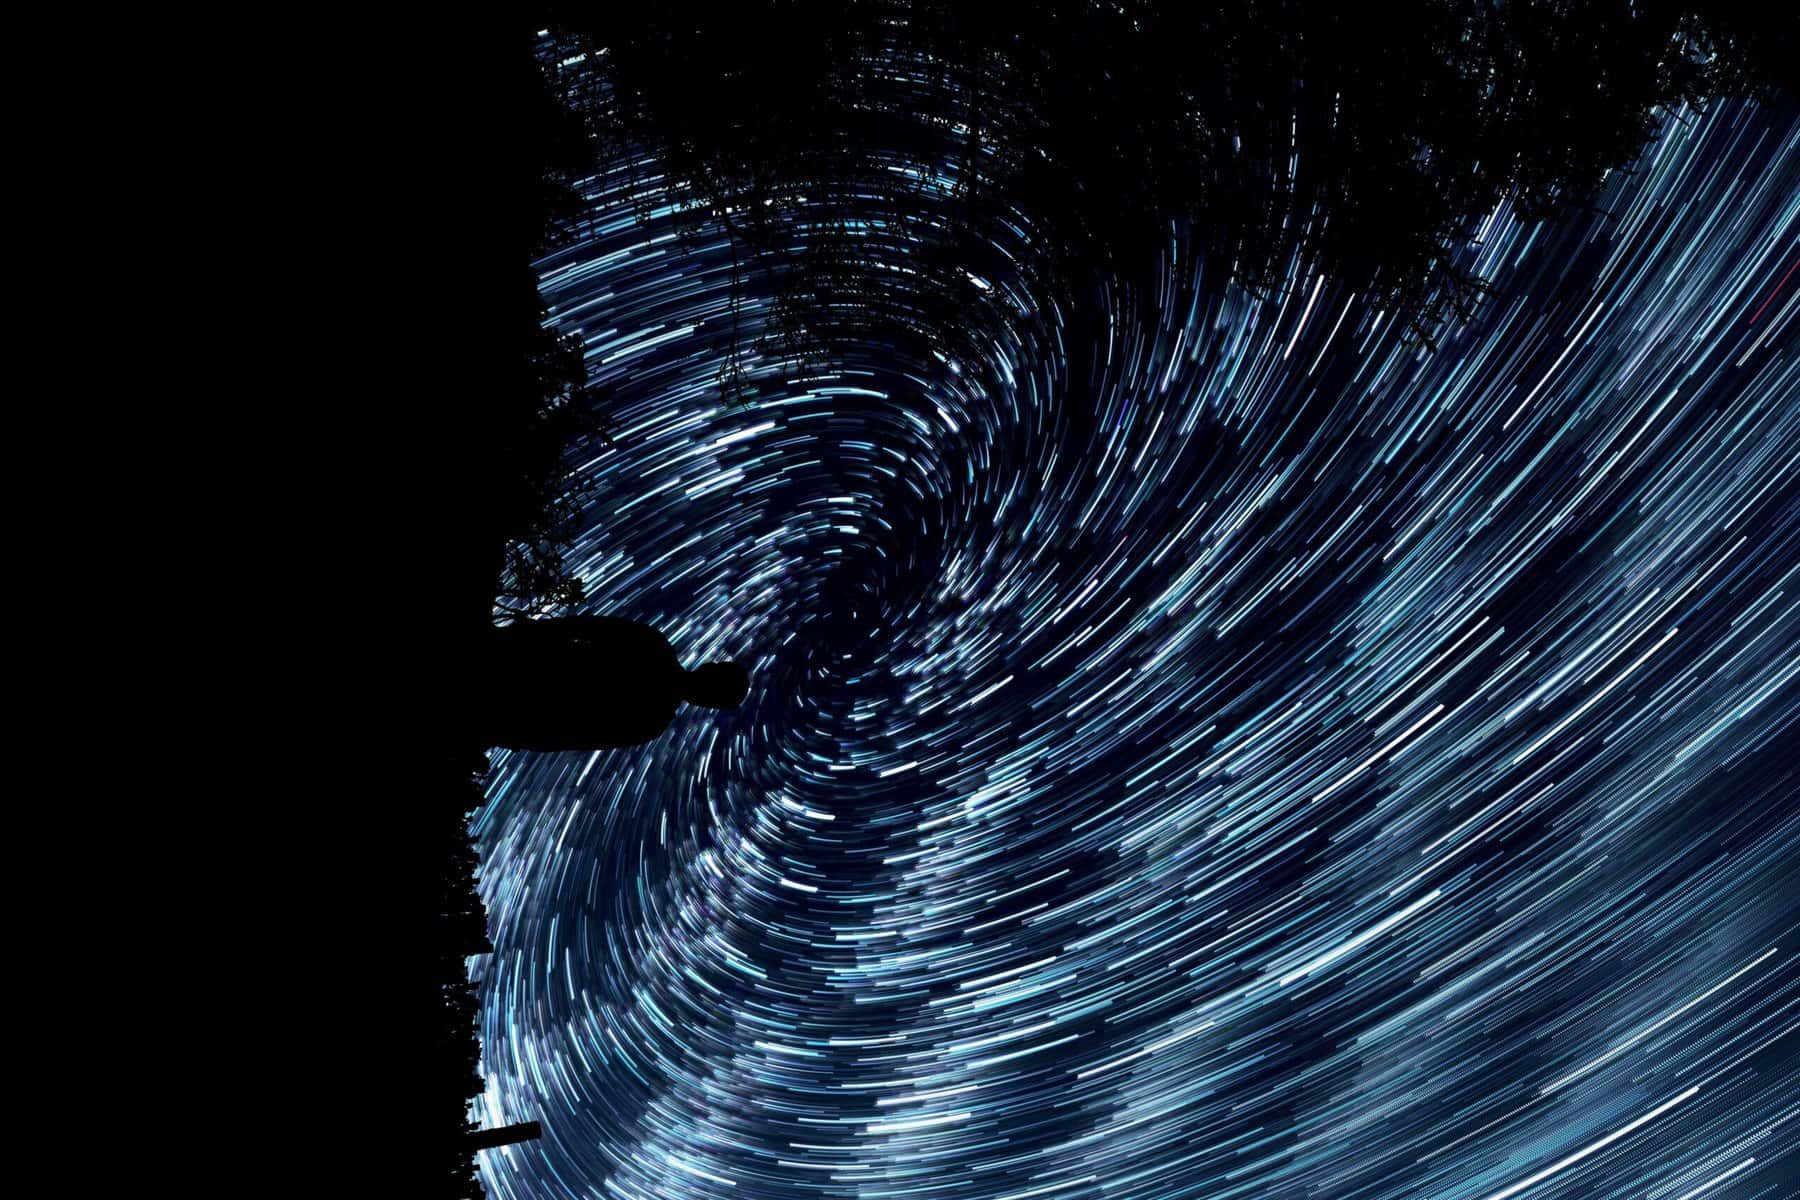 millions of swirling blue lights in the night sky